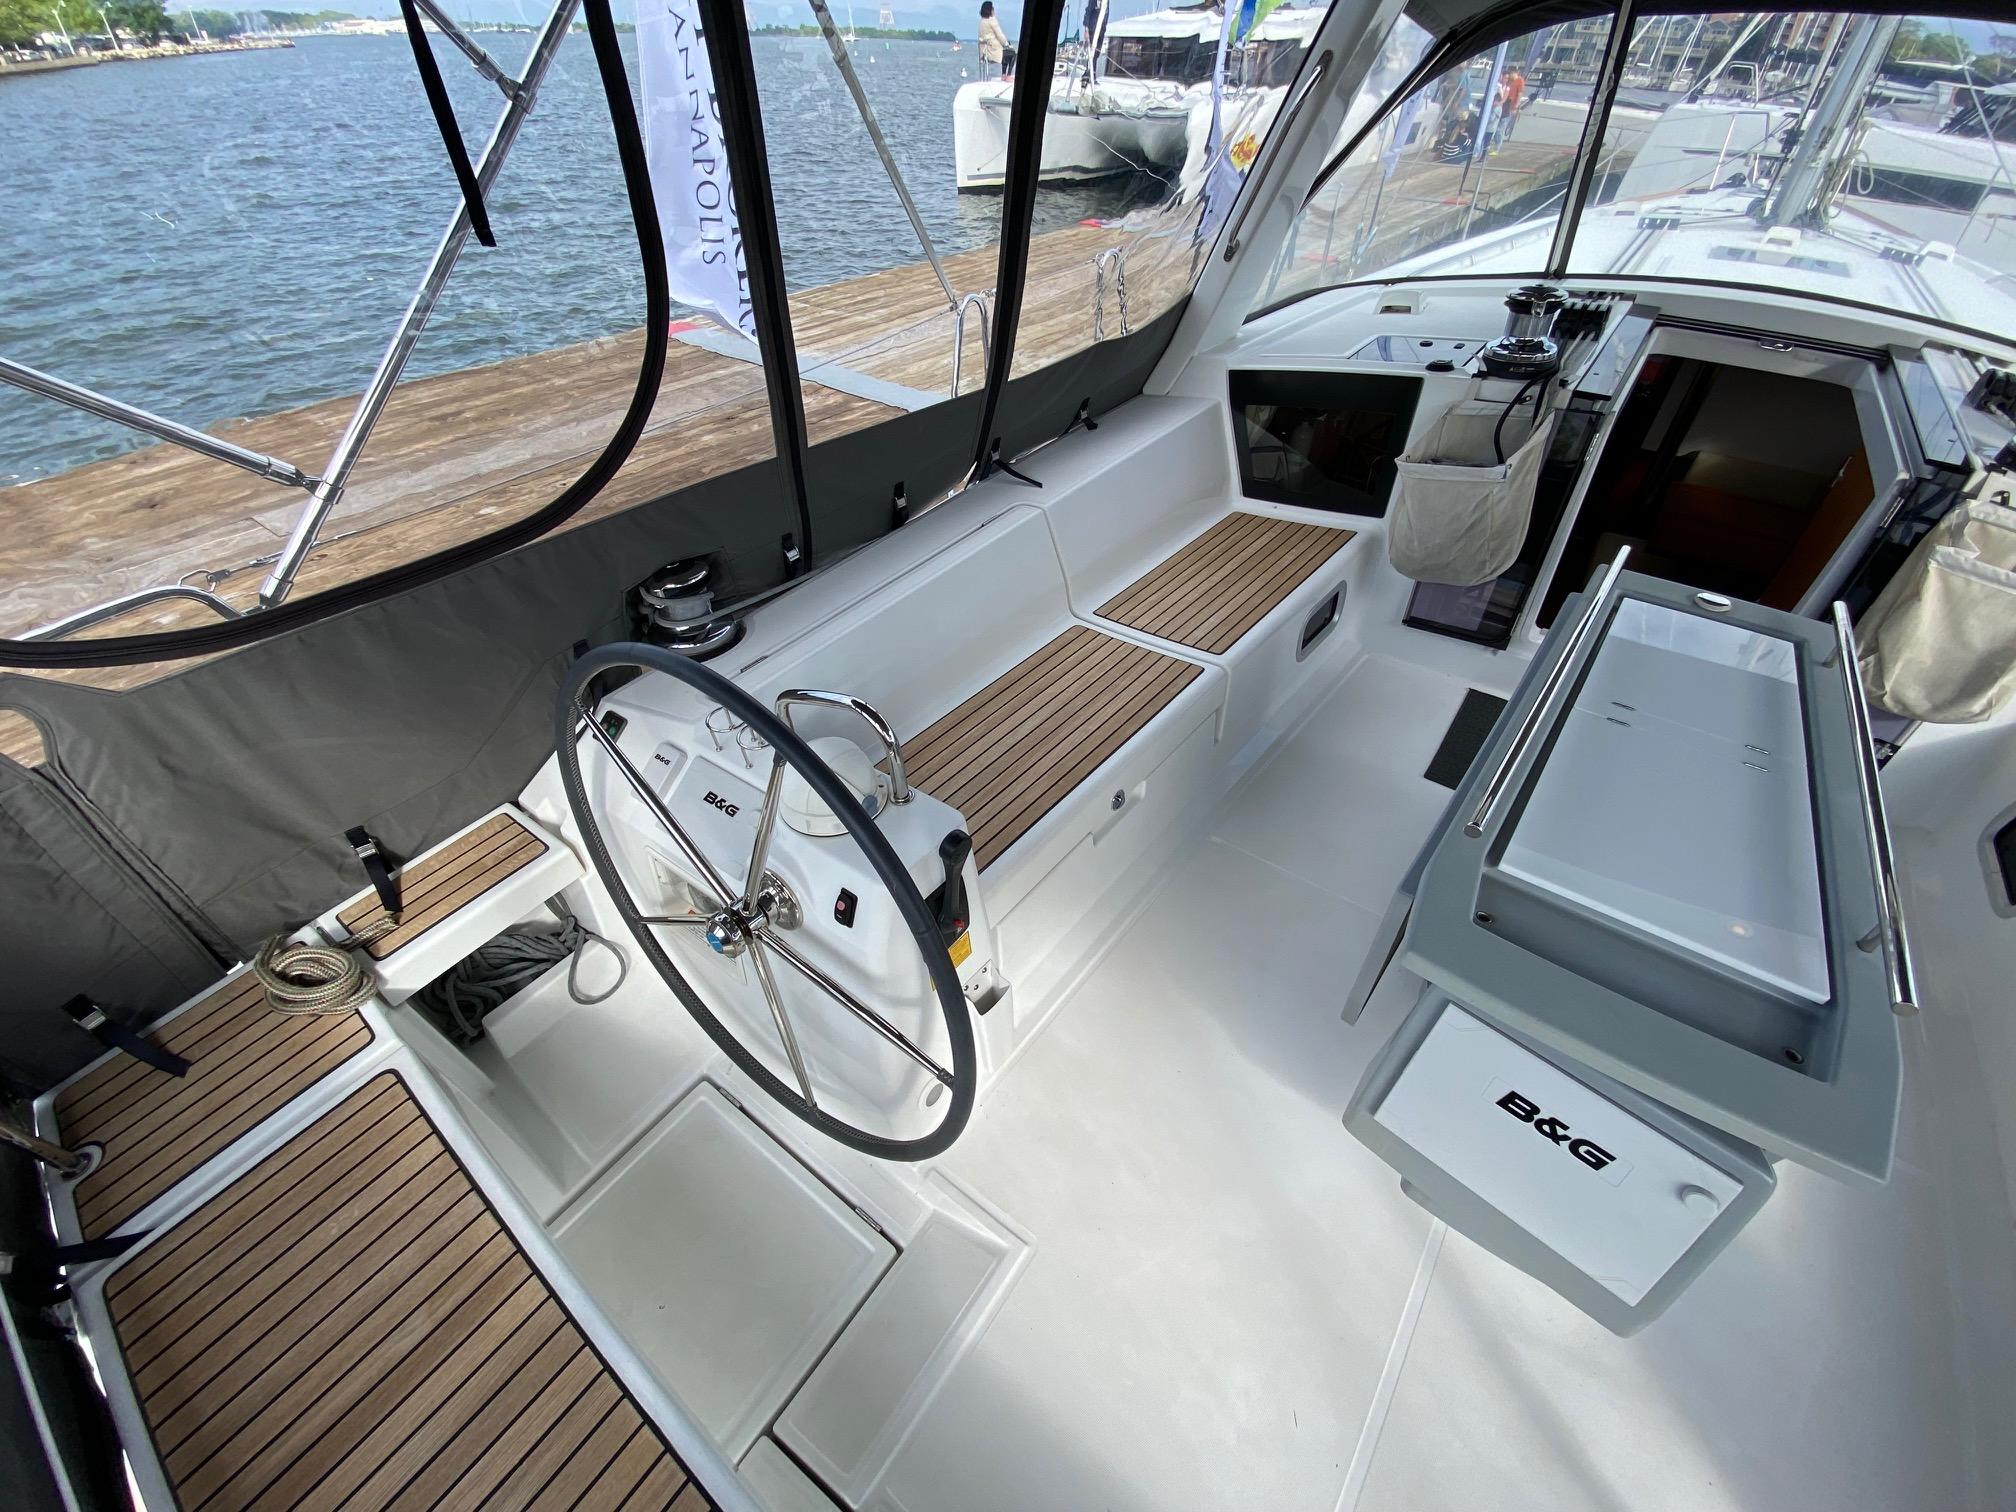 Serenity Yacht Brokers Of Annapolis